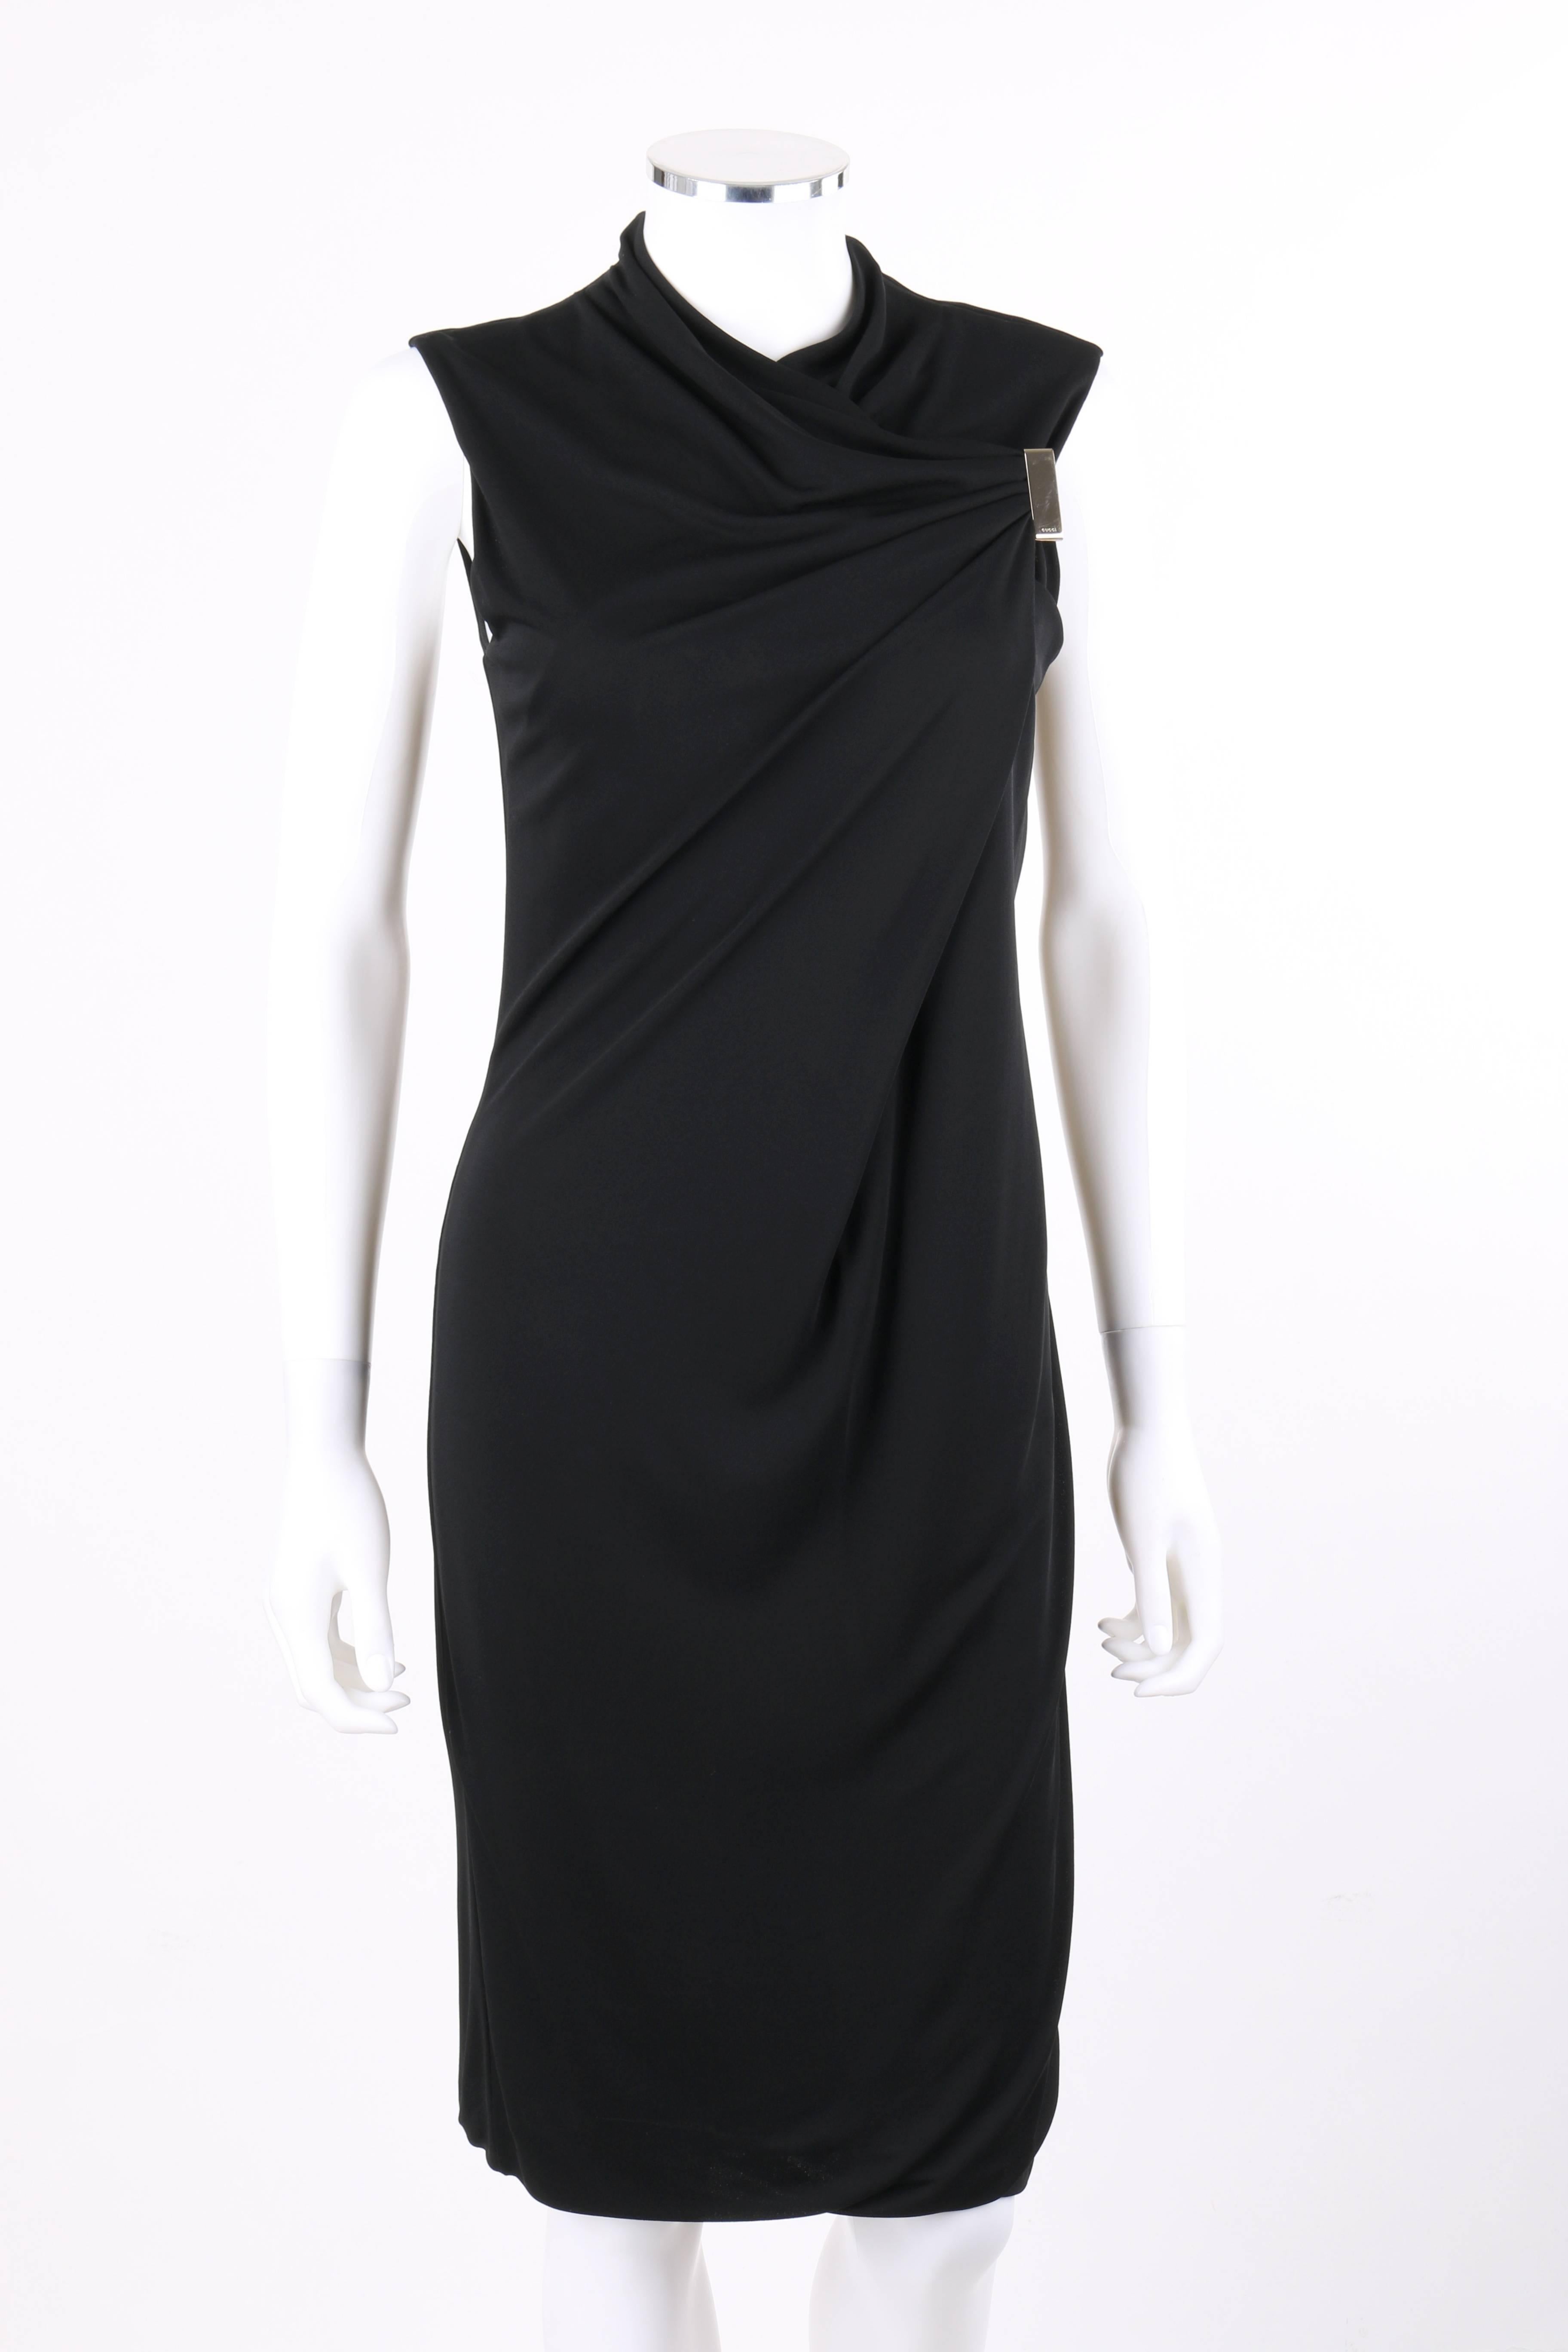 Gucci black jersey knit sleeveless draped shift cocktail dress. Crew neckline. Front crisscrossed drape detail with rectangular gold-toned metal brooch.  Sleeveless. Shift style. Center back invisible zipper with hook and eye closure at top. Fully